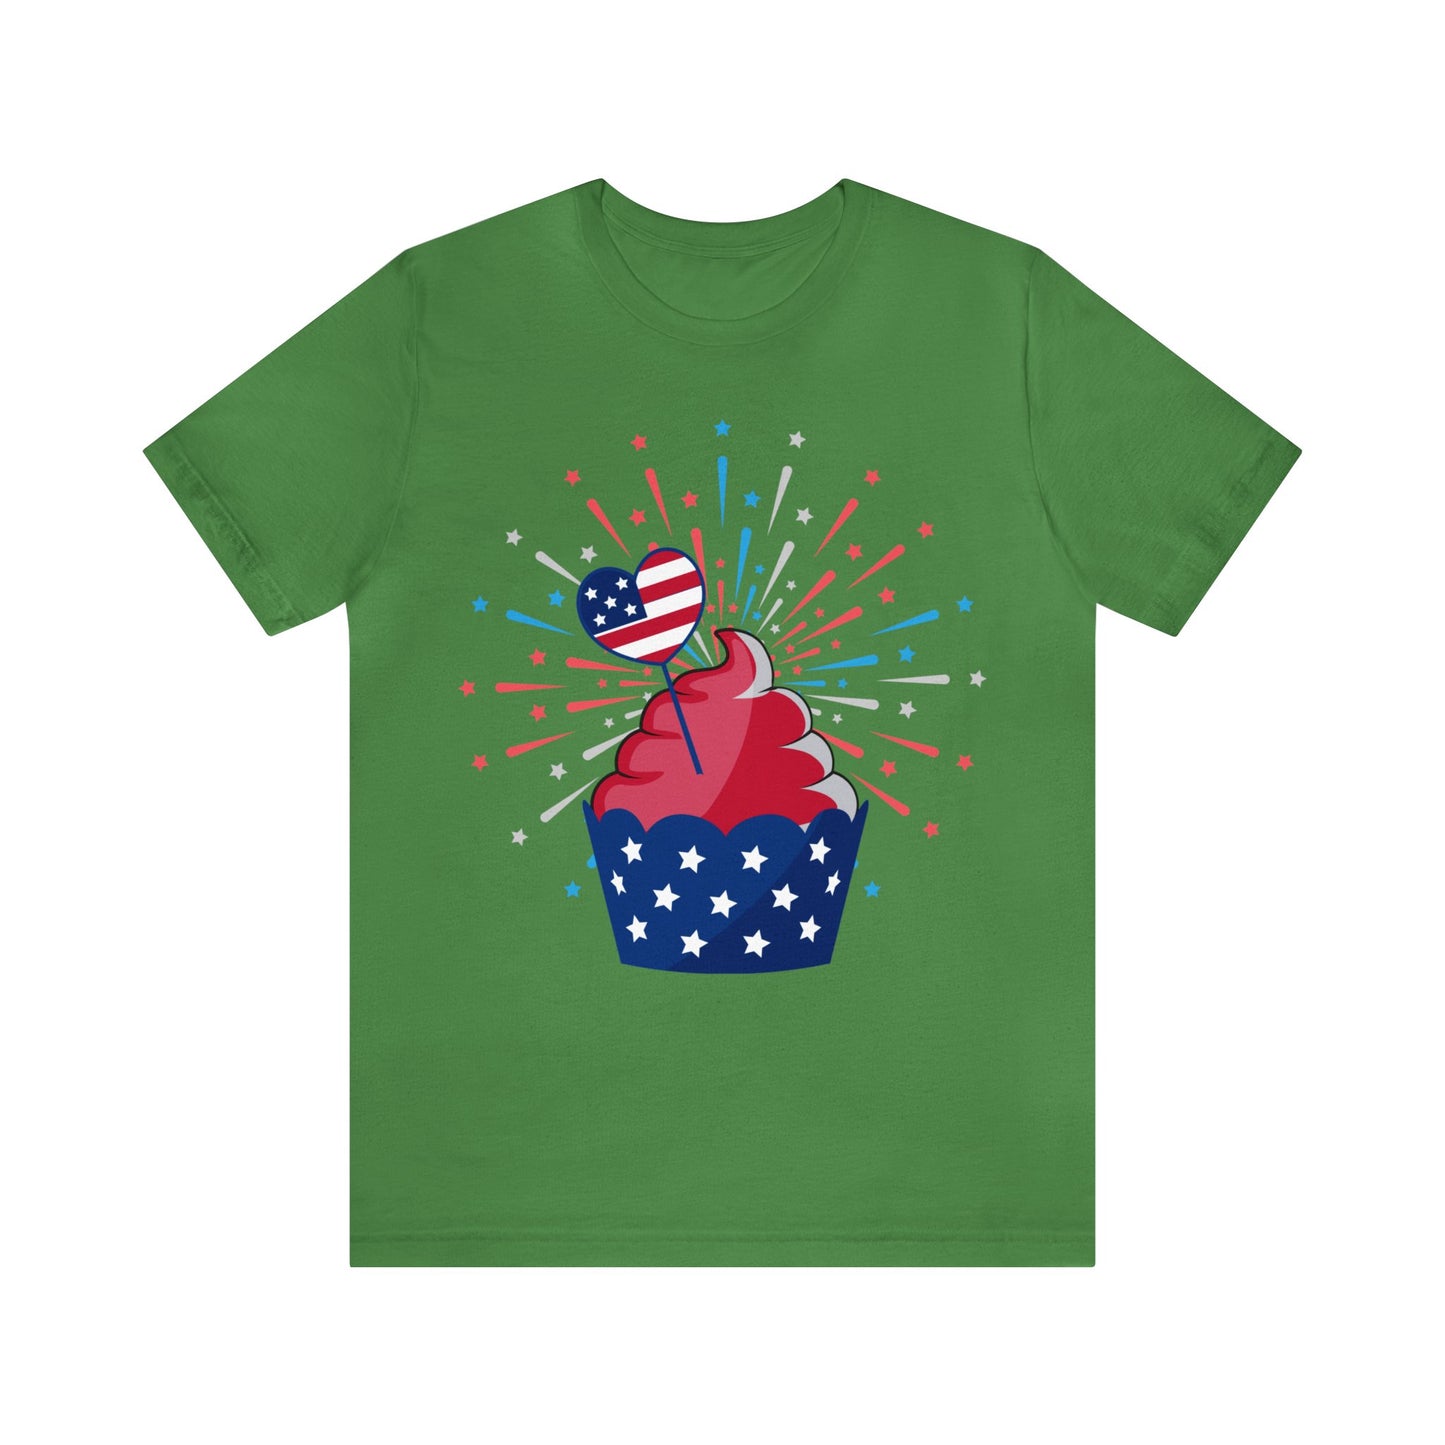 American Flag T-shirt: Patriotic Apparel for All Occasions